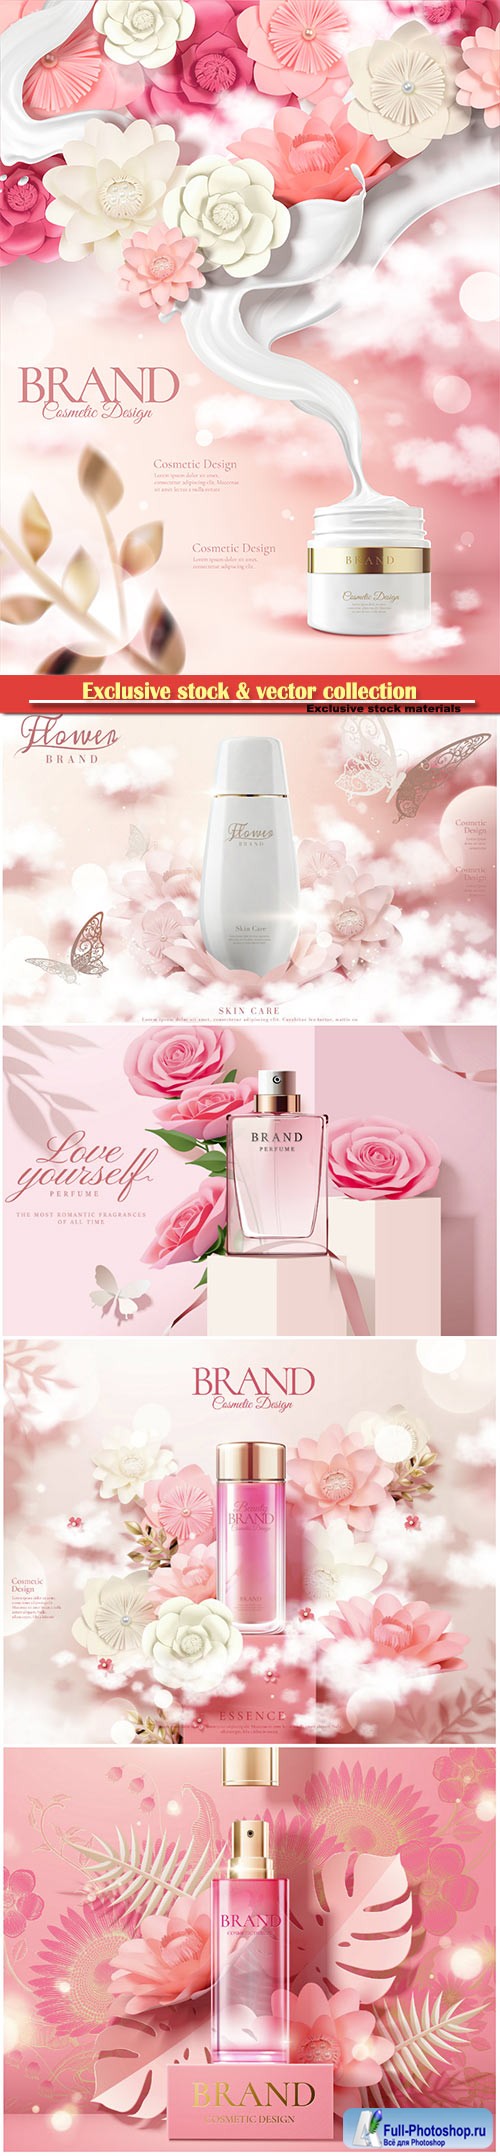 Skincare bottle ads with white and pink paper flowers in 3d illustration